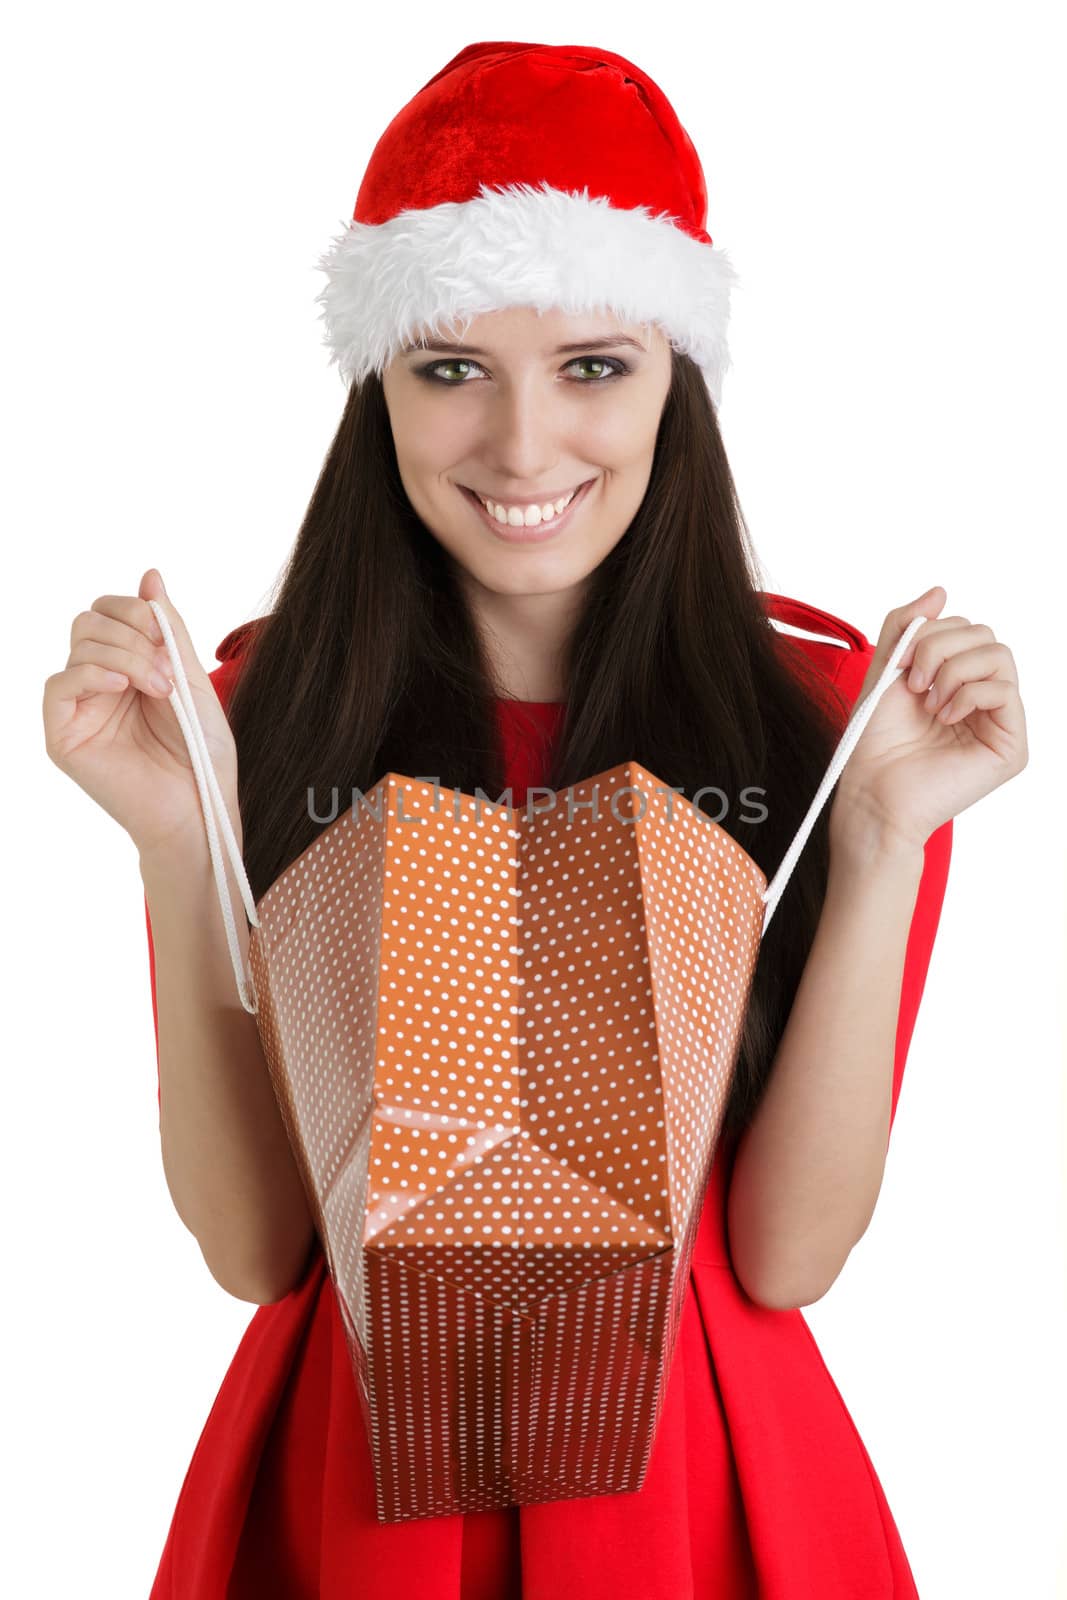 Christmas Girl with Open Shopping Bag by NicoletaIonescu